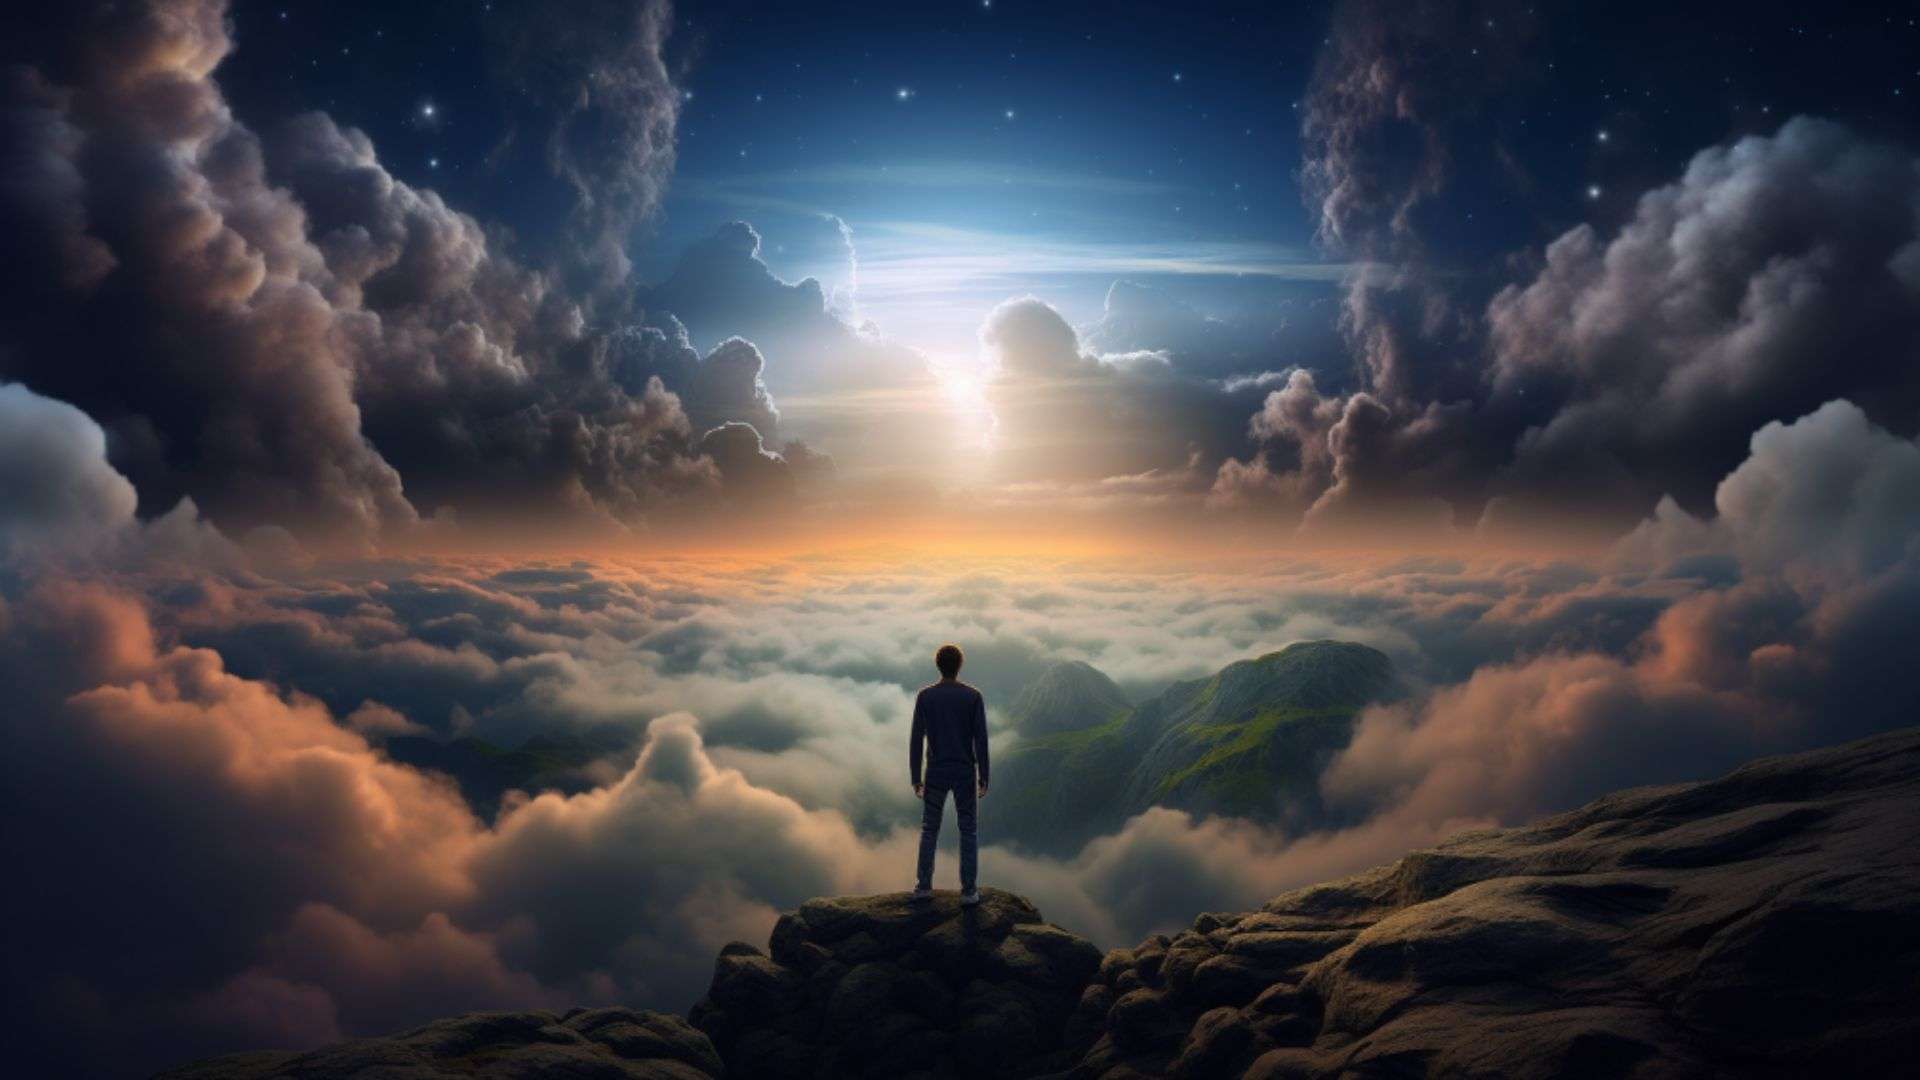 A depiction of the intriguing balance between the dream world and reality, emphasizing the quest to understand the true nature of lucid dreams in a way to outline the answer to the question are lucid dreams real.